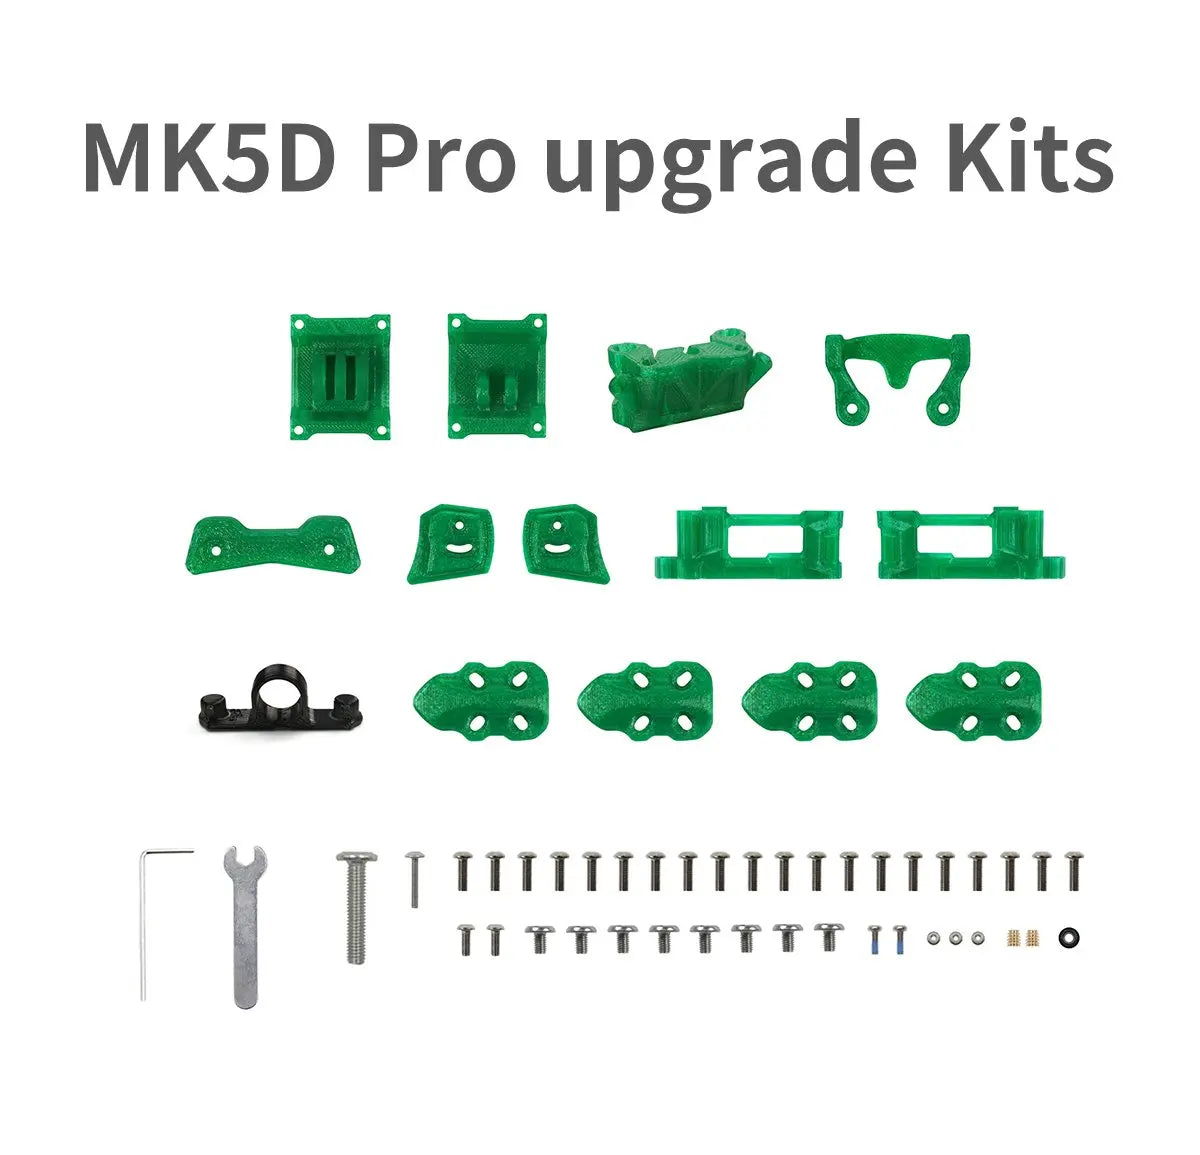 GEP-MK5D O3 MK5X to MK5D Conve DeadCat Frame, FPV Freestyle RC Racing Drone Mark5 - Parts Propeller Access